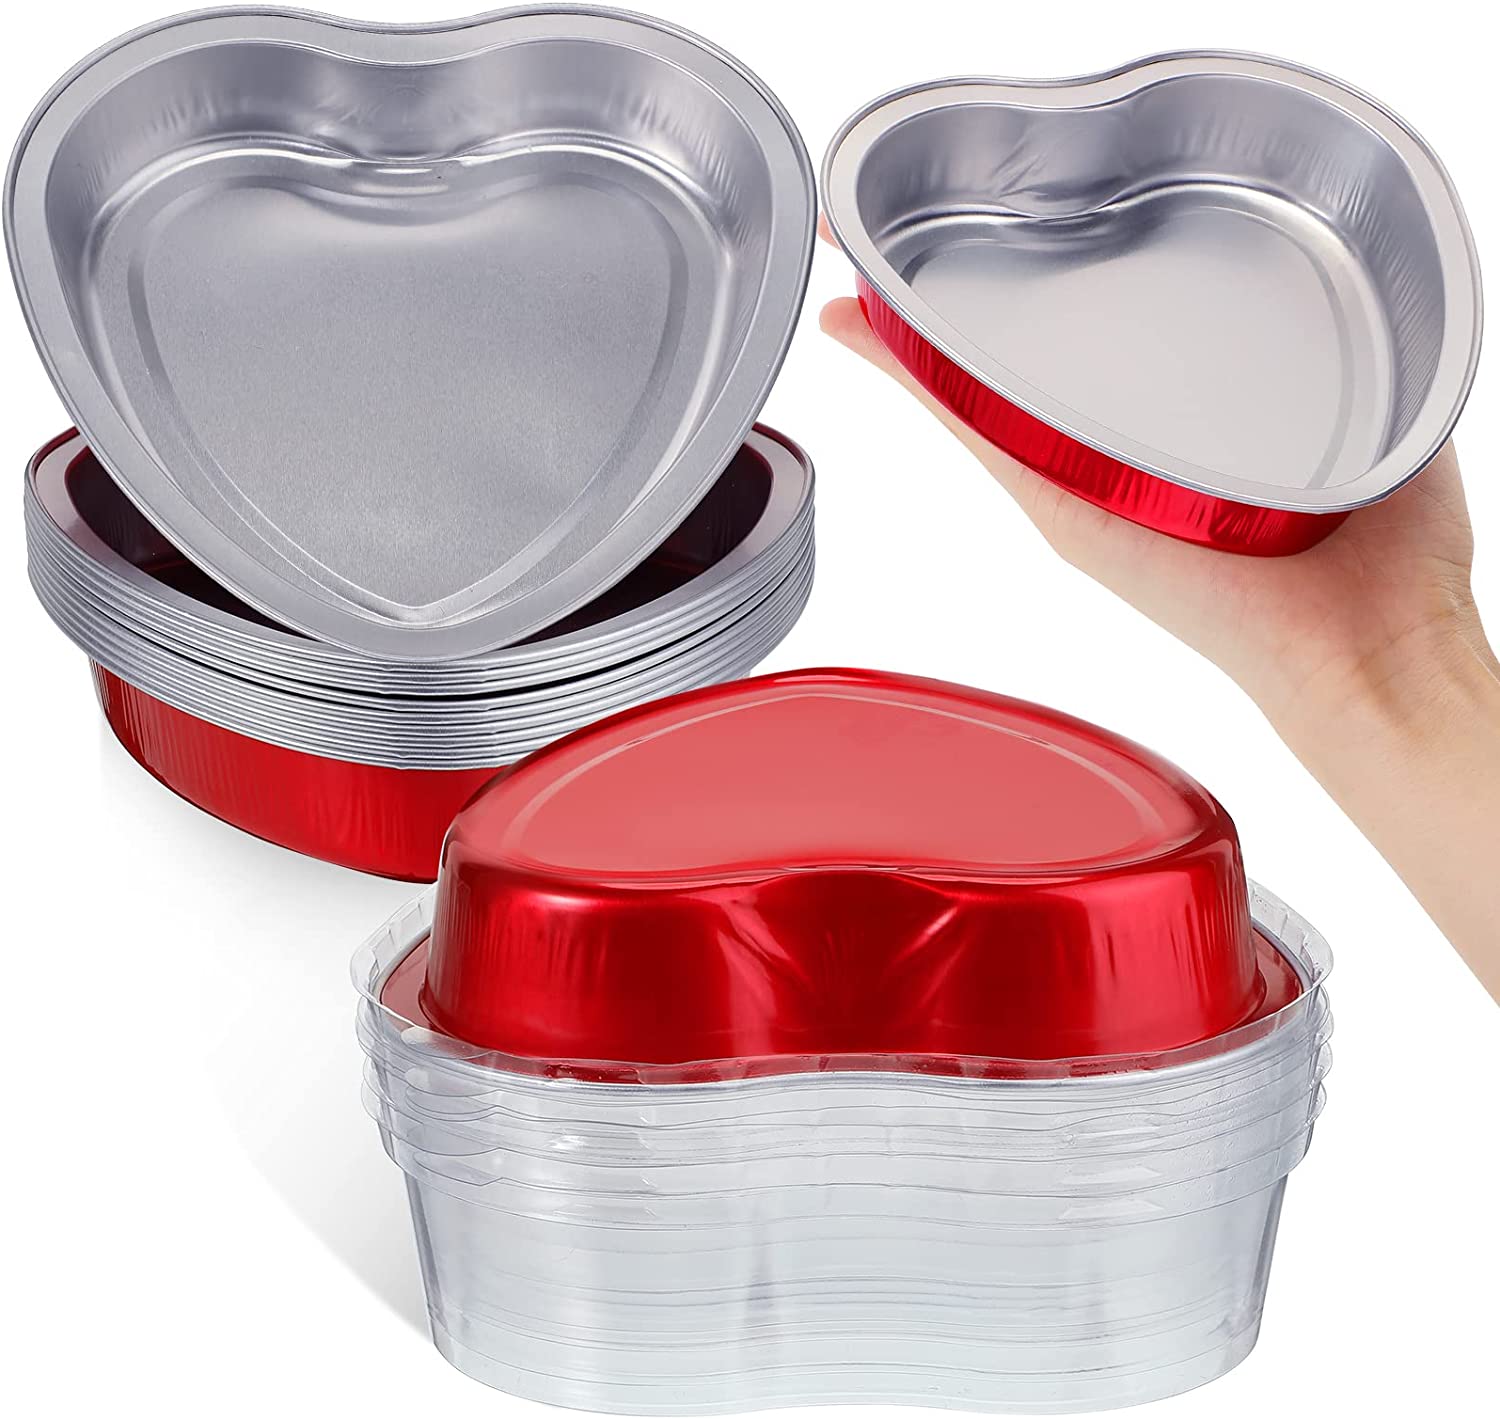 ZOENHOU 4 PCS 5 6 8 10 Heart Shaped Cake Pans with Removable Bottom,  Aluminum Heart Shaped Cake Pans Set, Non Stick Heart Layers Cake Pan for  Oven